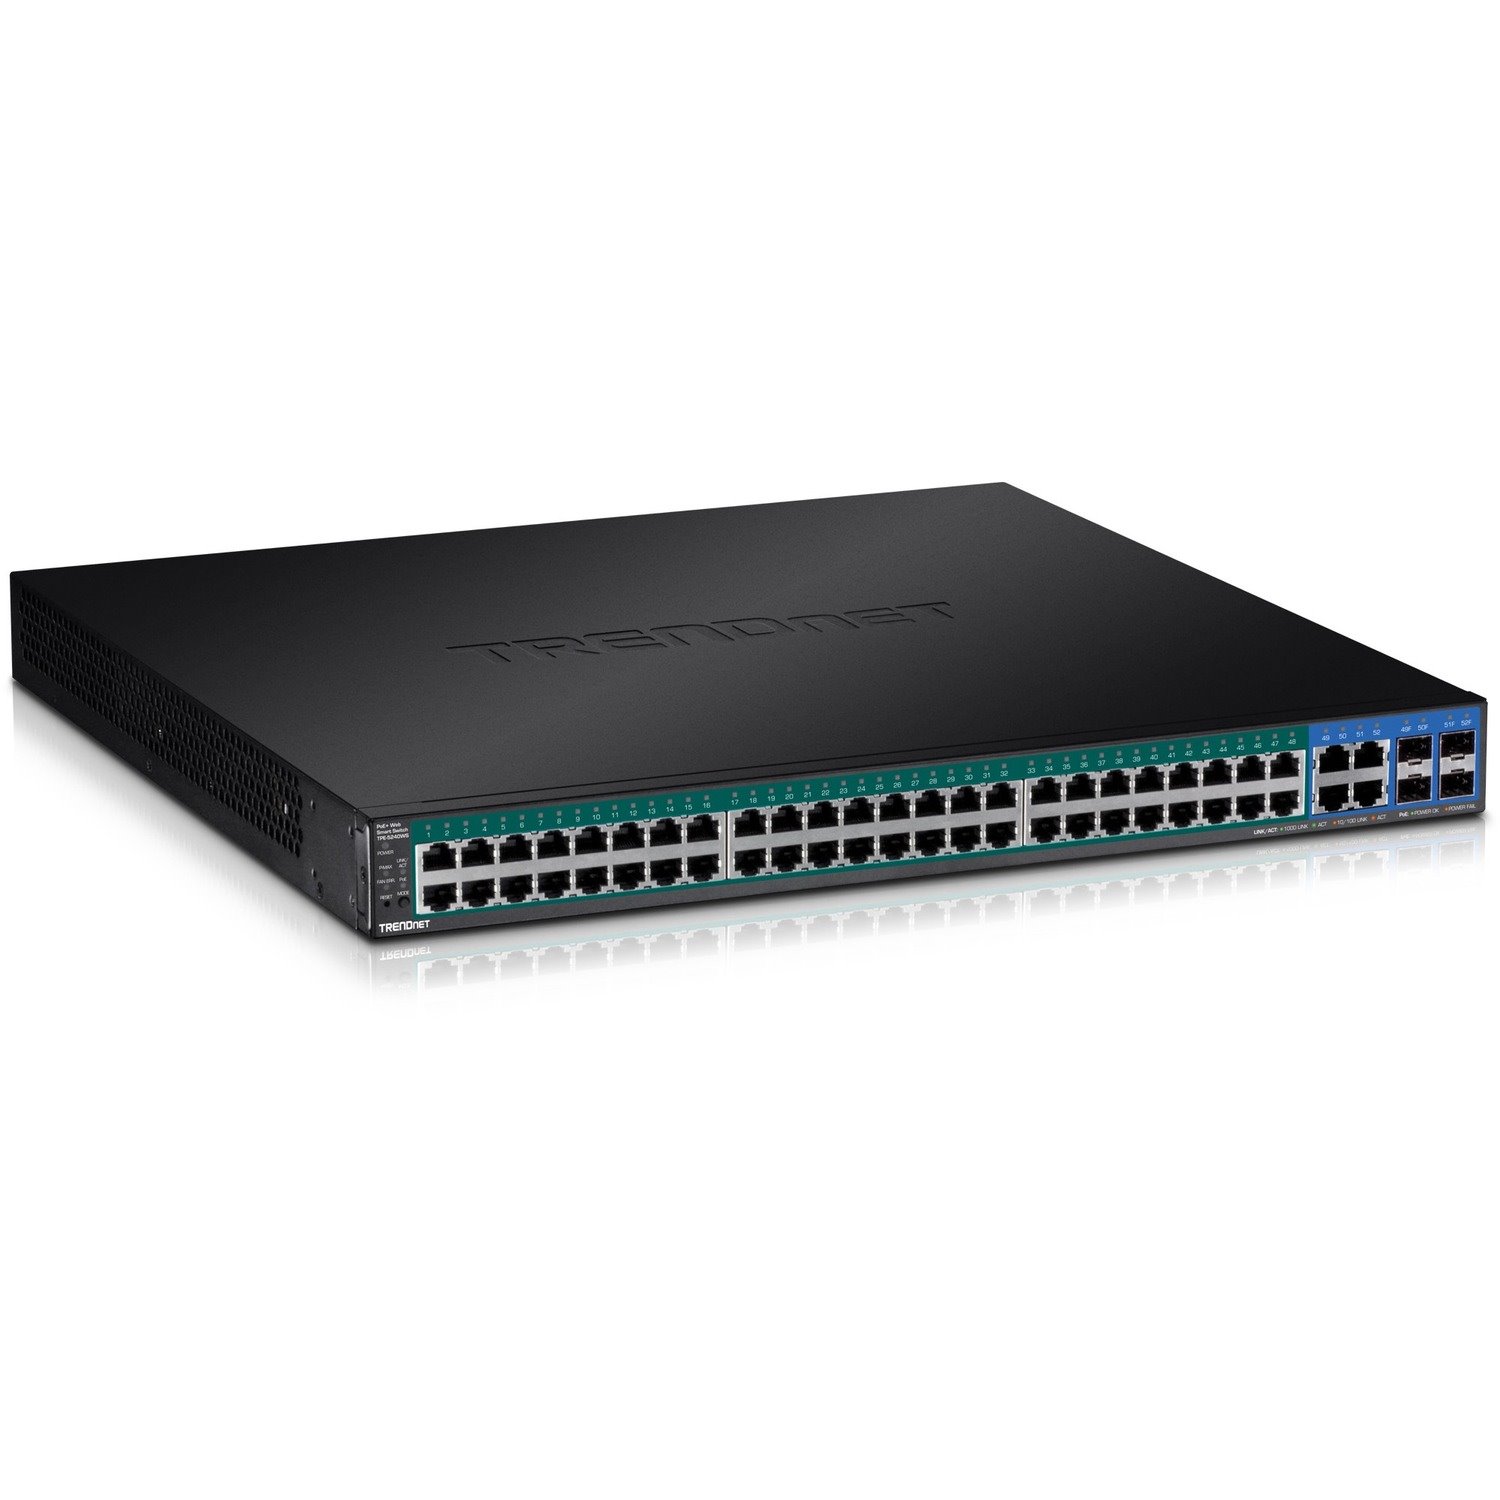 TRENDnet 52-Port Gigabit Web Smart PoE+ Switch, 48 Gigabit PoE+ Ports, 4 Shared Gigabit Ports (RJ-45 Or SFP), 370W PoE Power Budget, 104Gbps Switching Capacity, Lifetime Protection, Black, TPE-5240WS